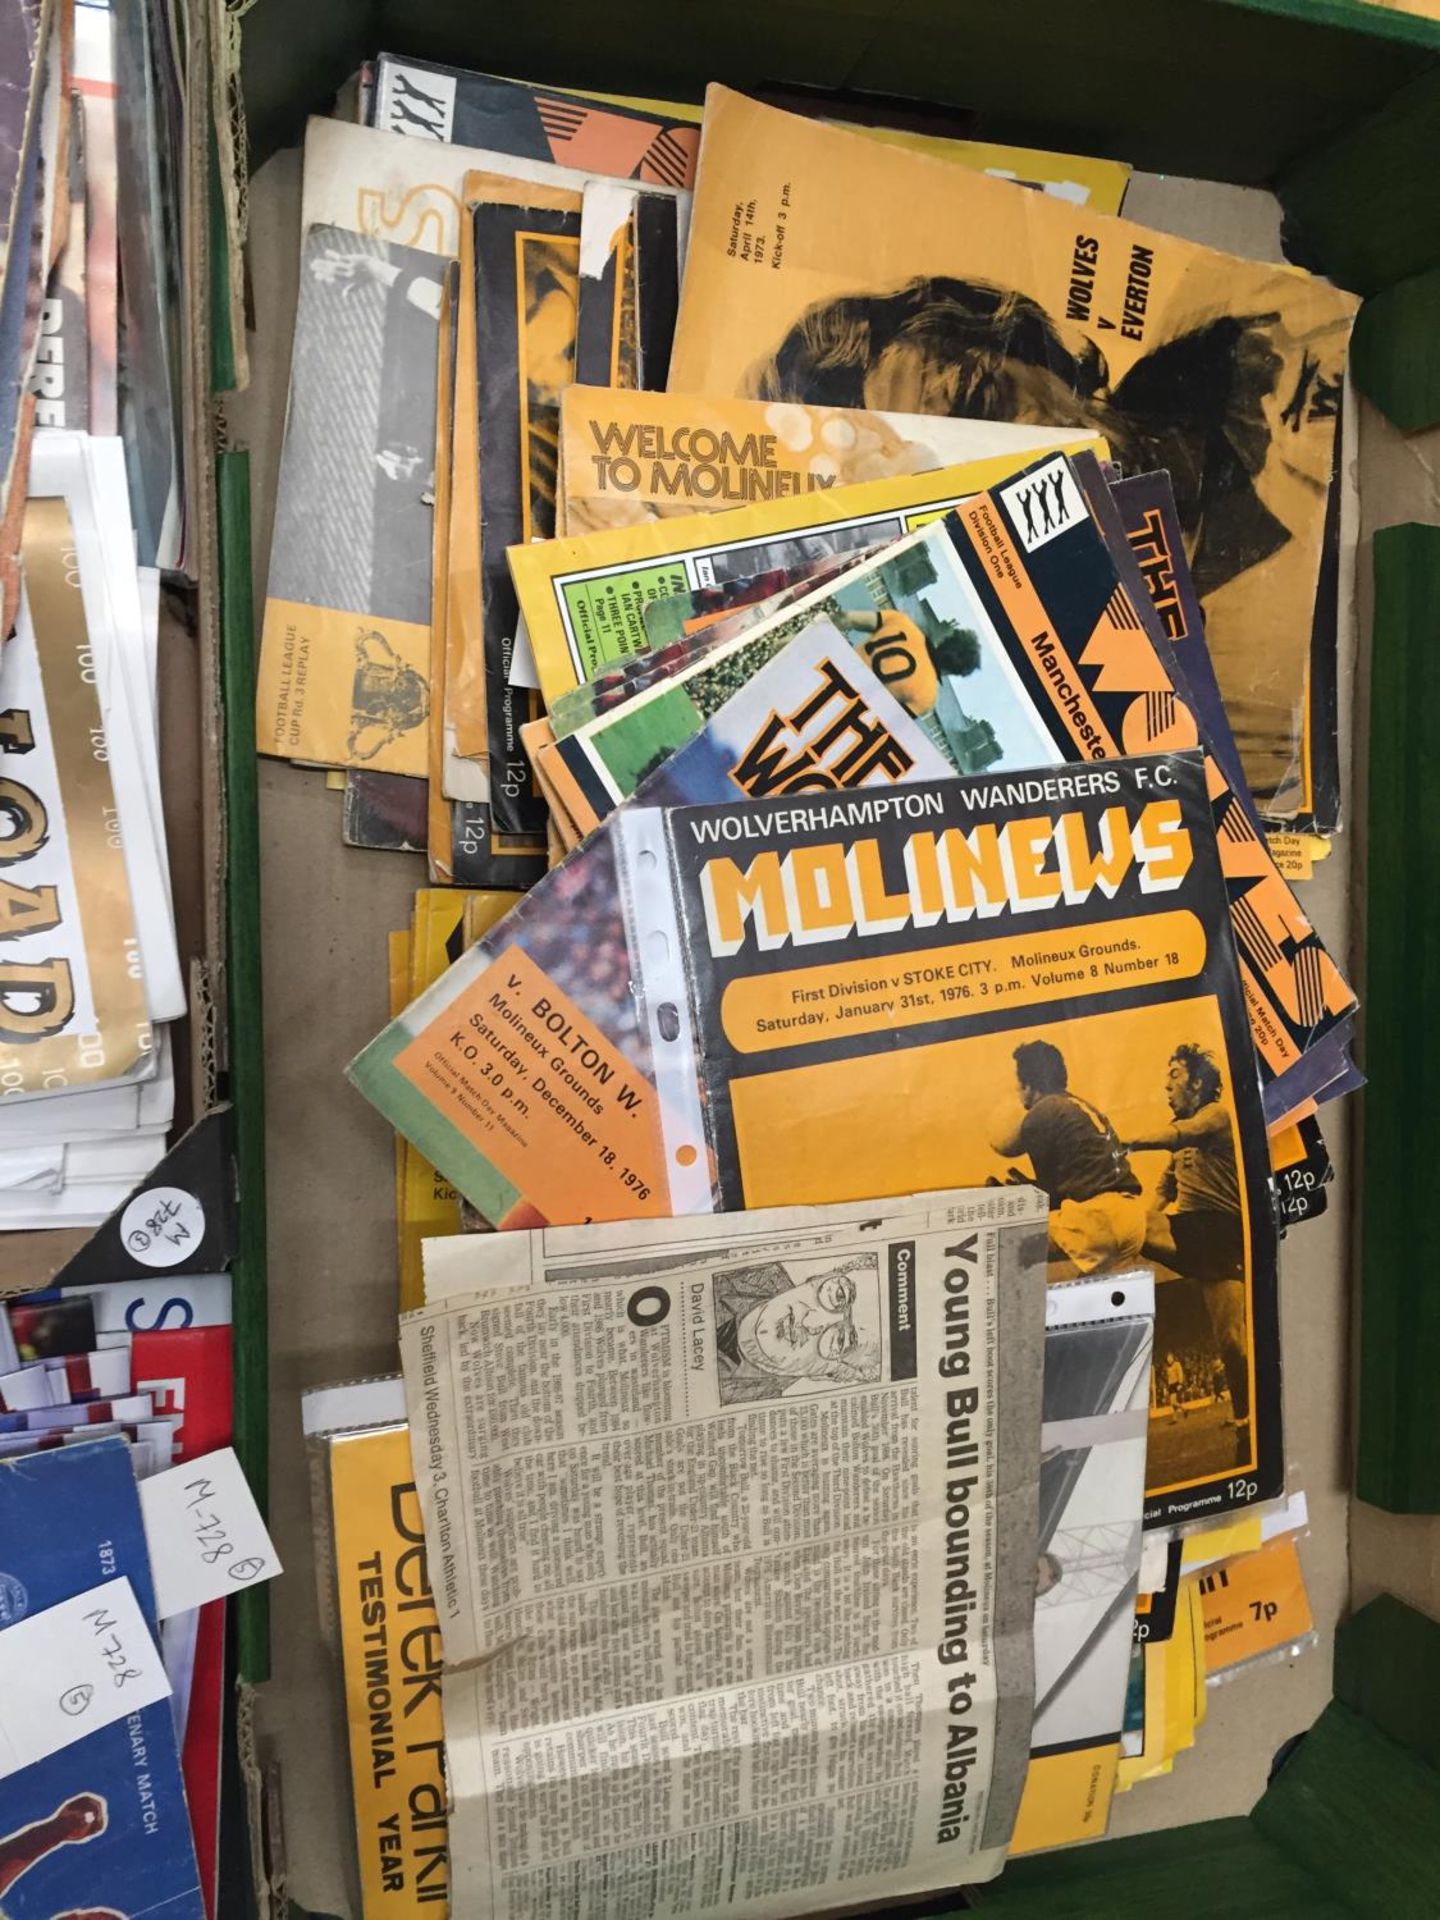 A VERY LARGE COLLECTION OF 115 WOLVES PROGRAMMES FROM THE 1970'S